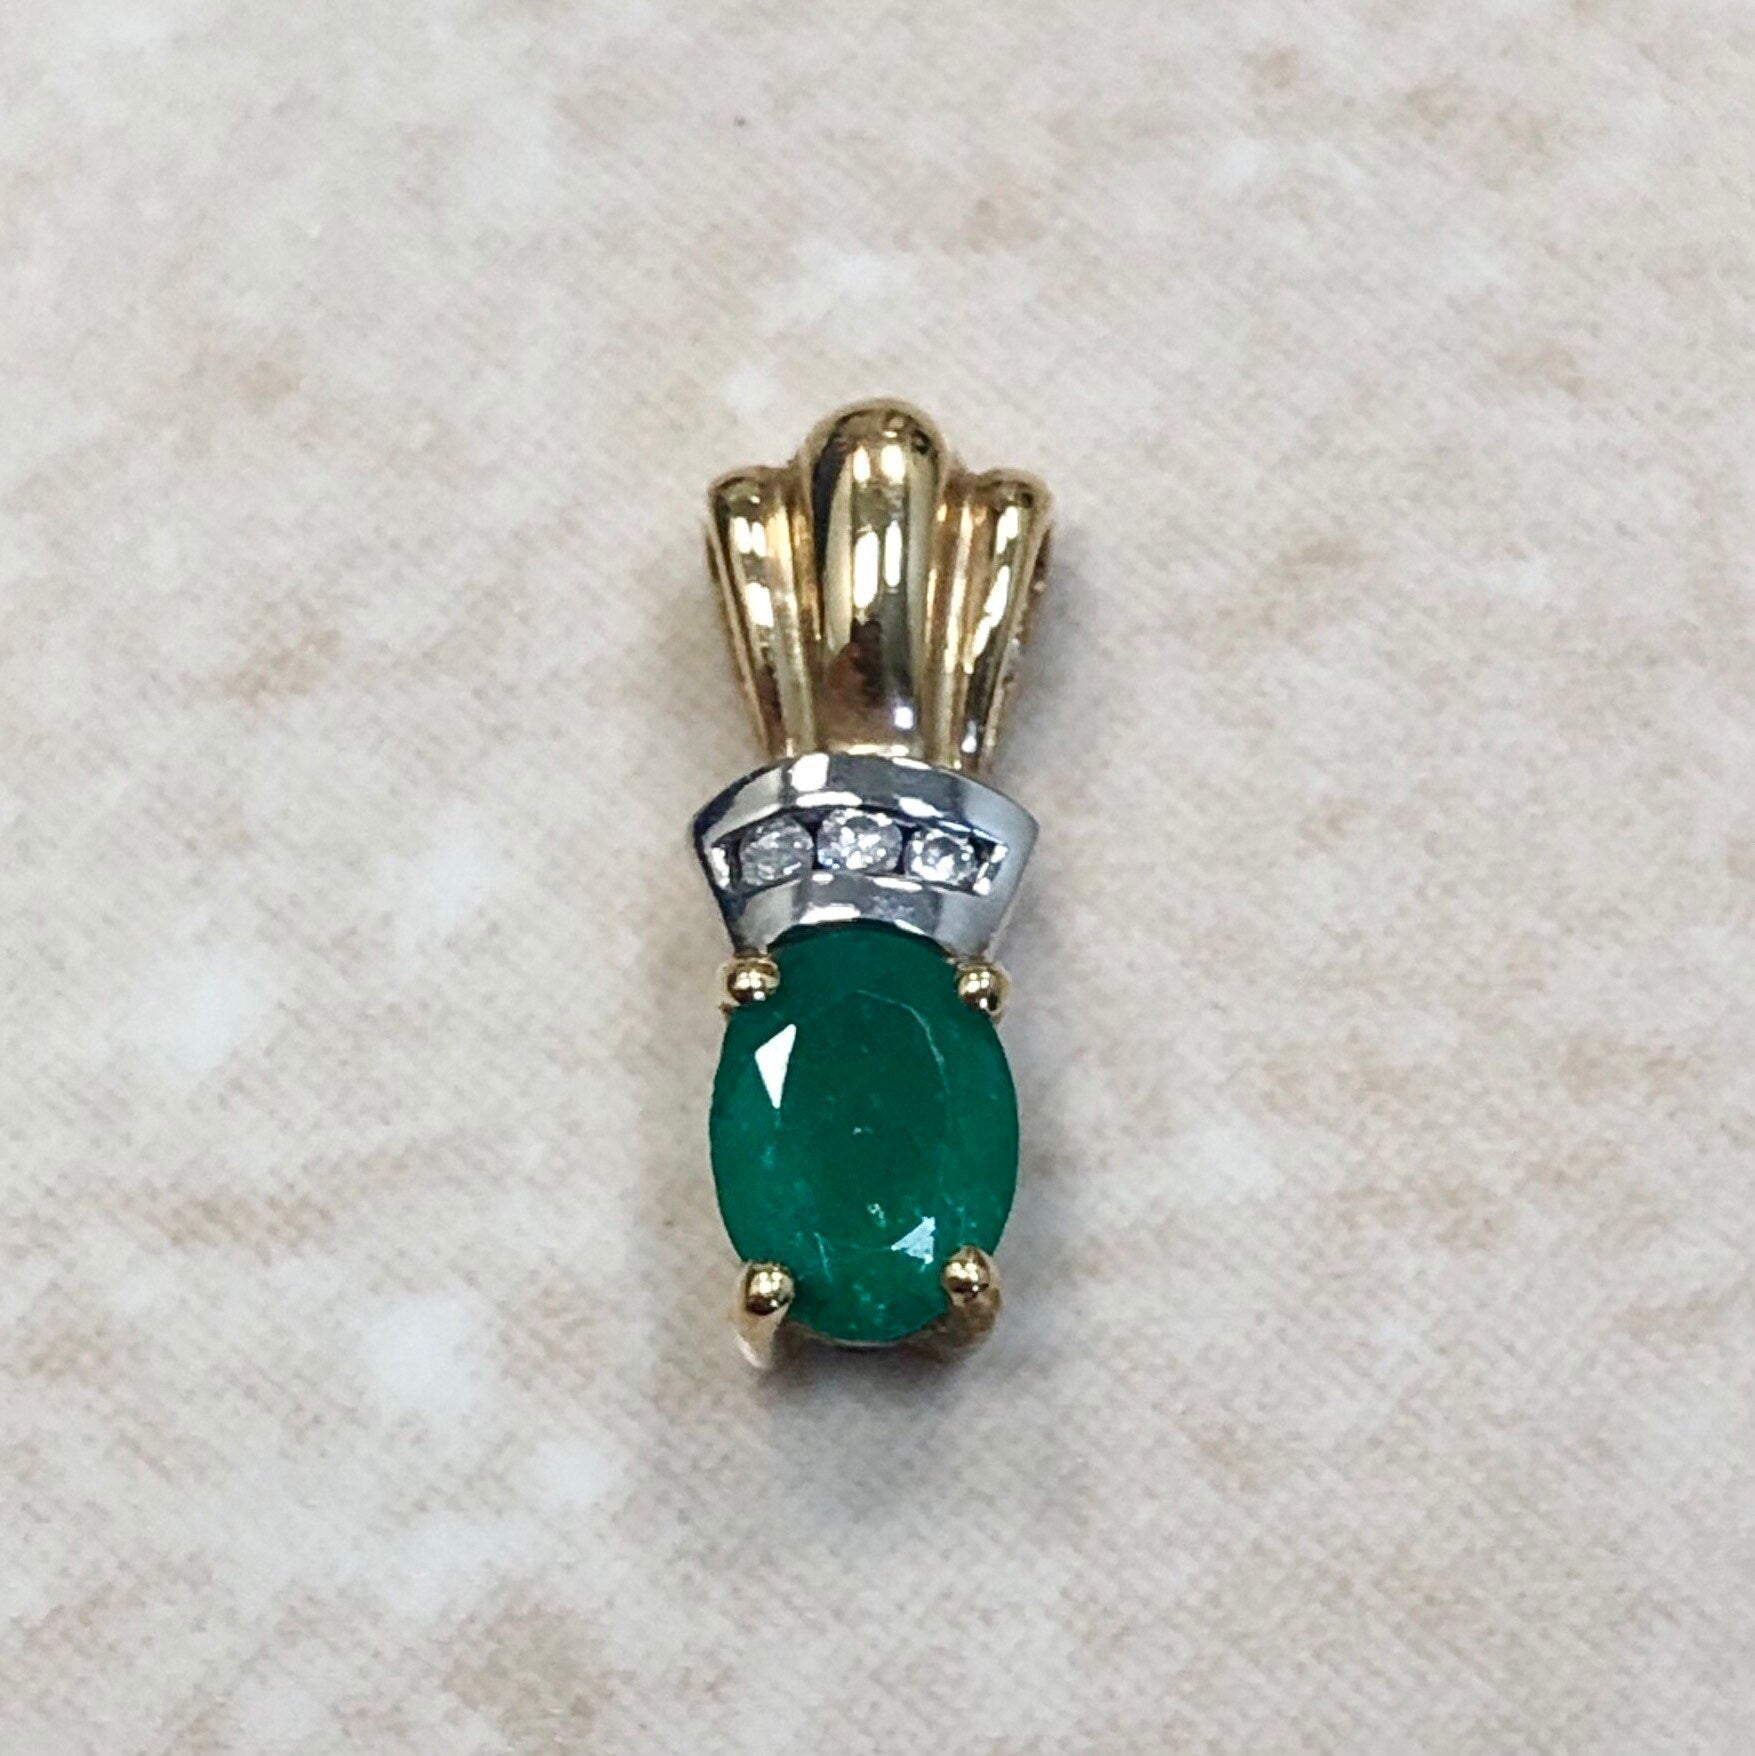 Vintage Emerald & Diamond Pendant Necklace - 10K Two Tone Gold - Emerald Diamond Necklace - Genuine Gemstone - May Birthstone Gift